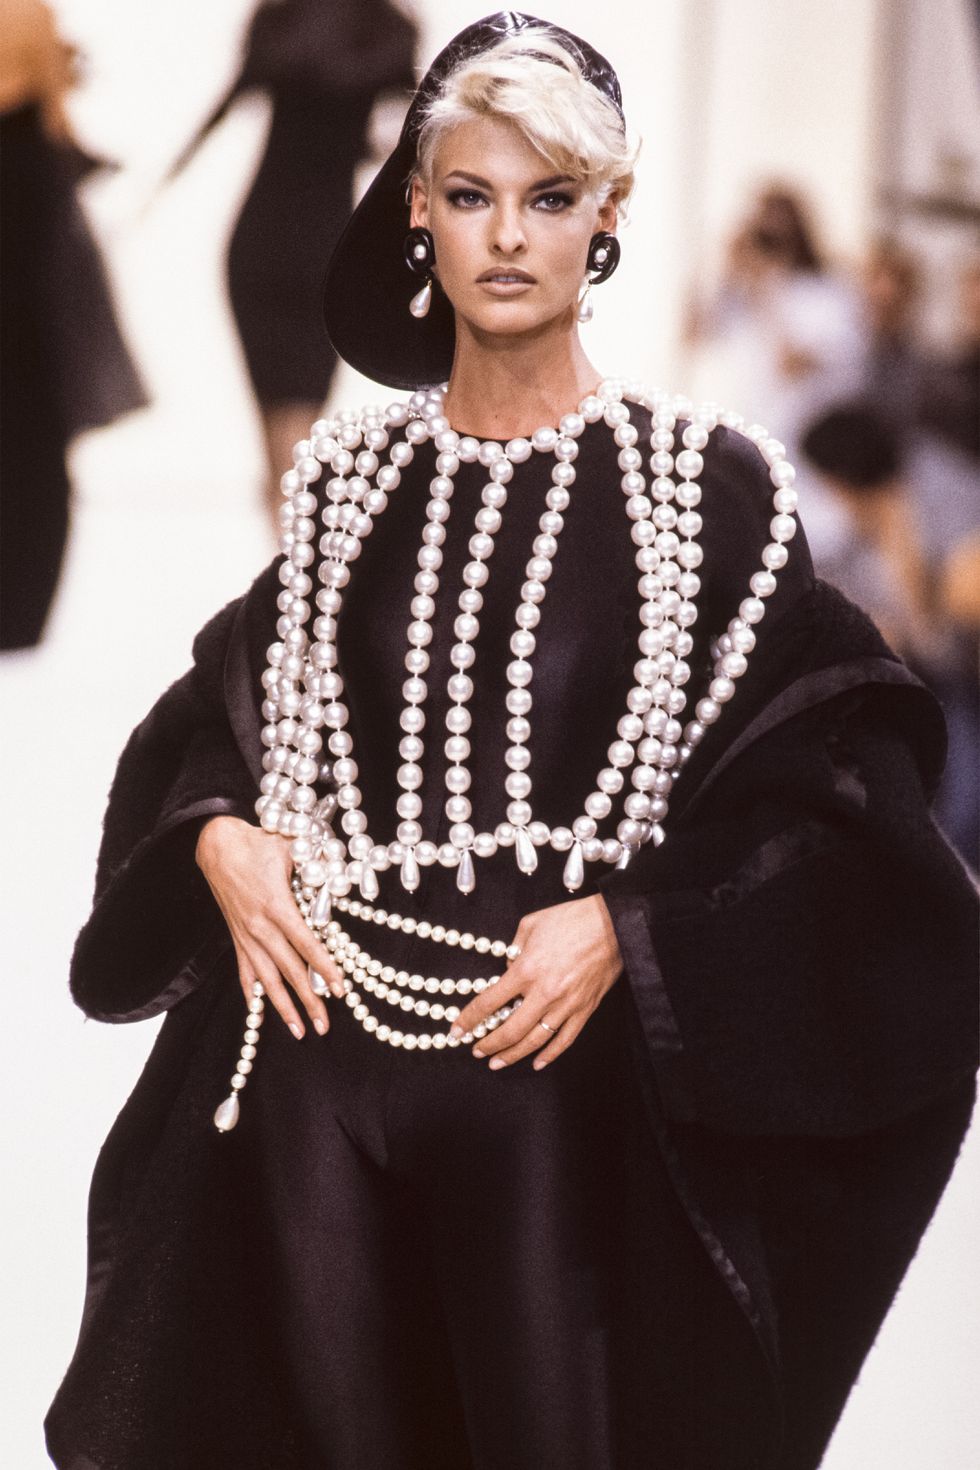 Donna Karan Fall 1995 Ready To Wear Runway Show News Photo - Getty Images